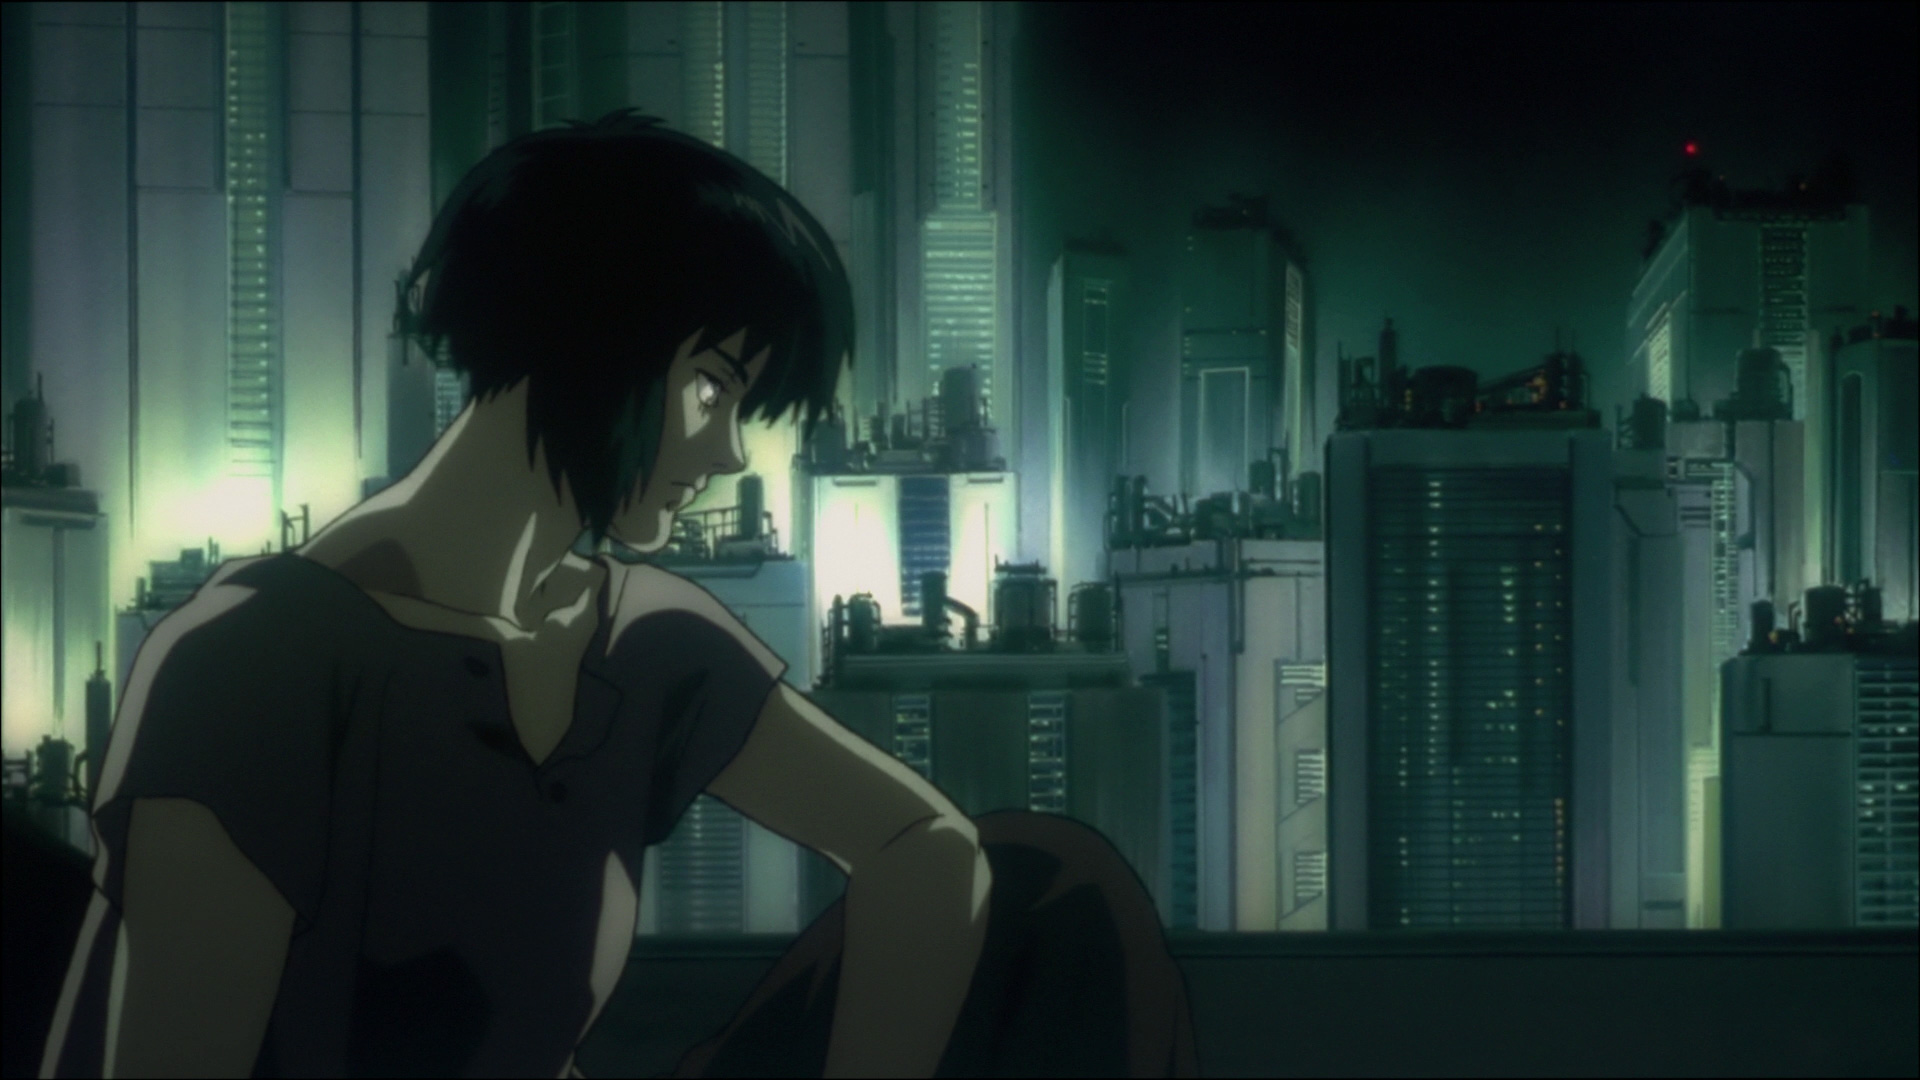 EDITORIAL: The art and themes of Mamoru Oshii’s ‘Ghost In The Shell’